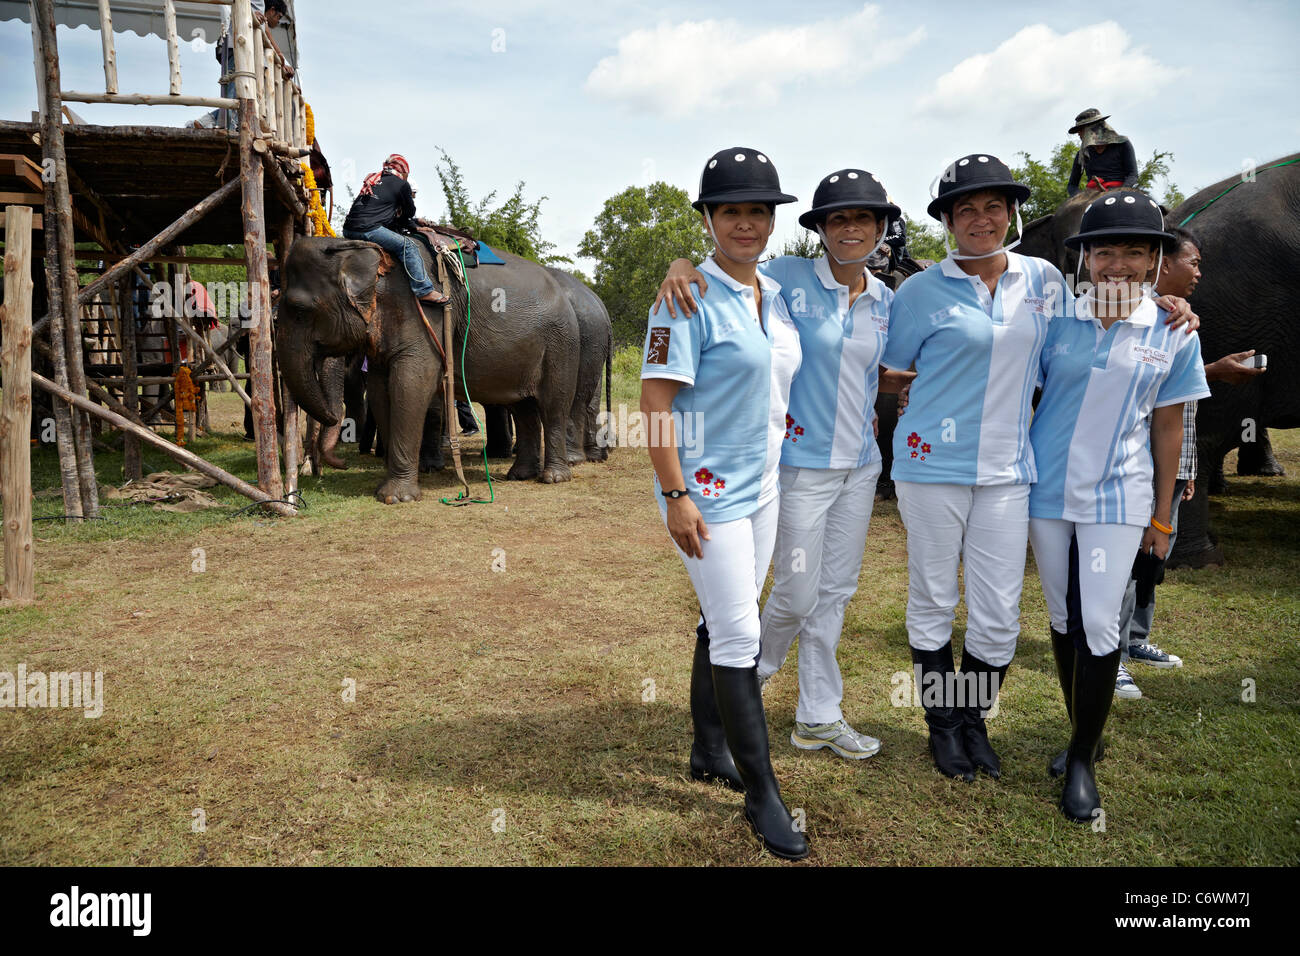 Sportswomen. Members of the Soco ladies elephant polo team competing at the 10th Kings Cup tournament 2011. Hua Hin Thailand S.E. Asia Stock Photo